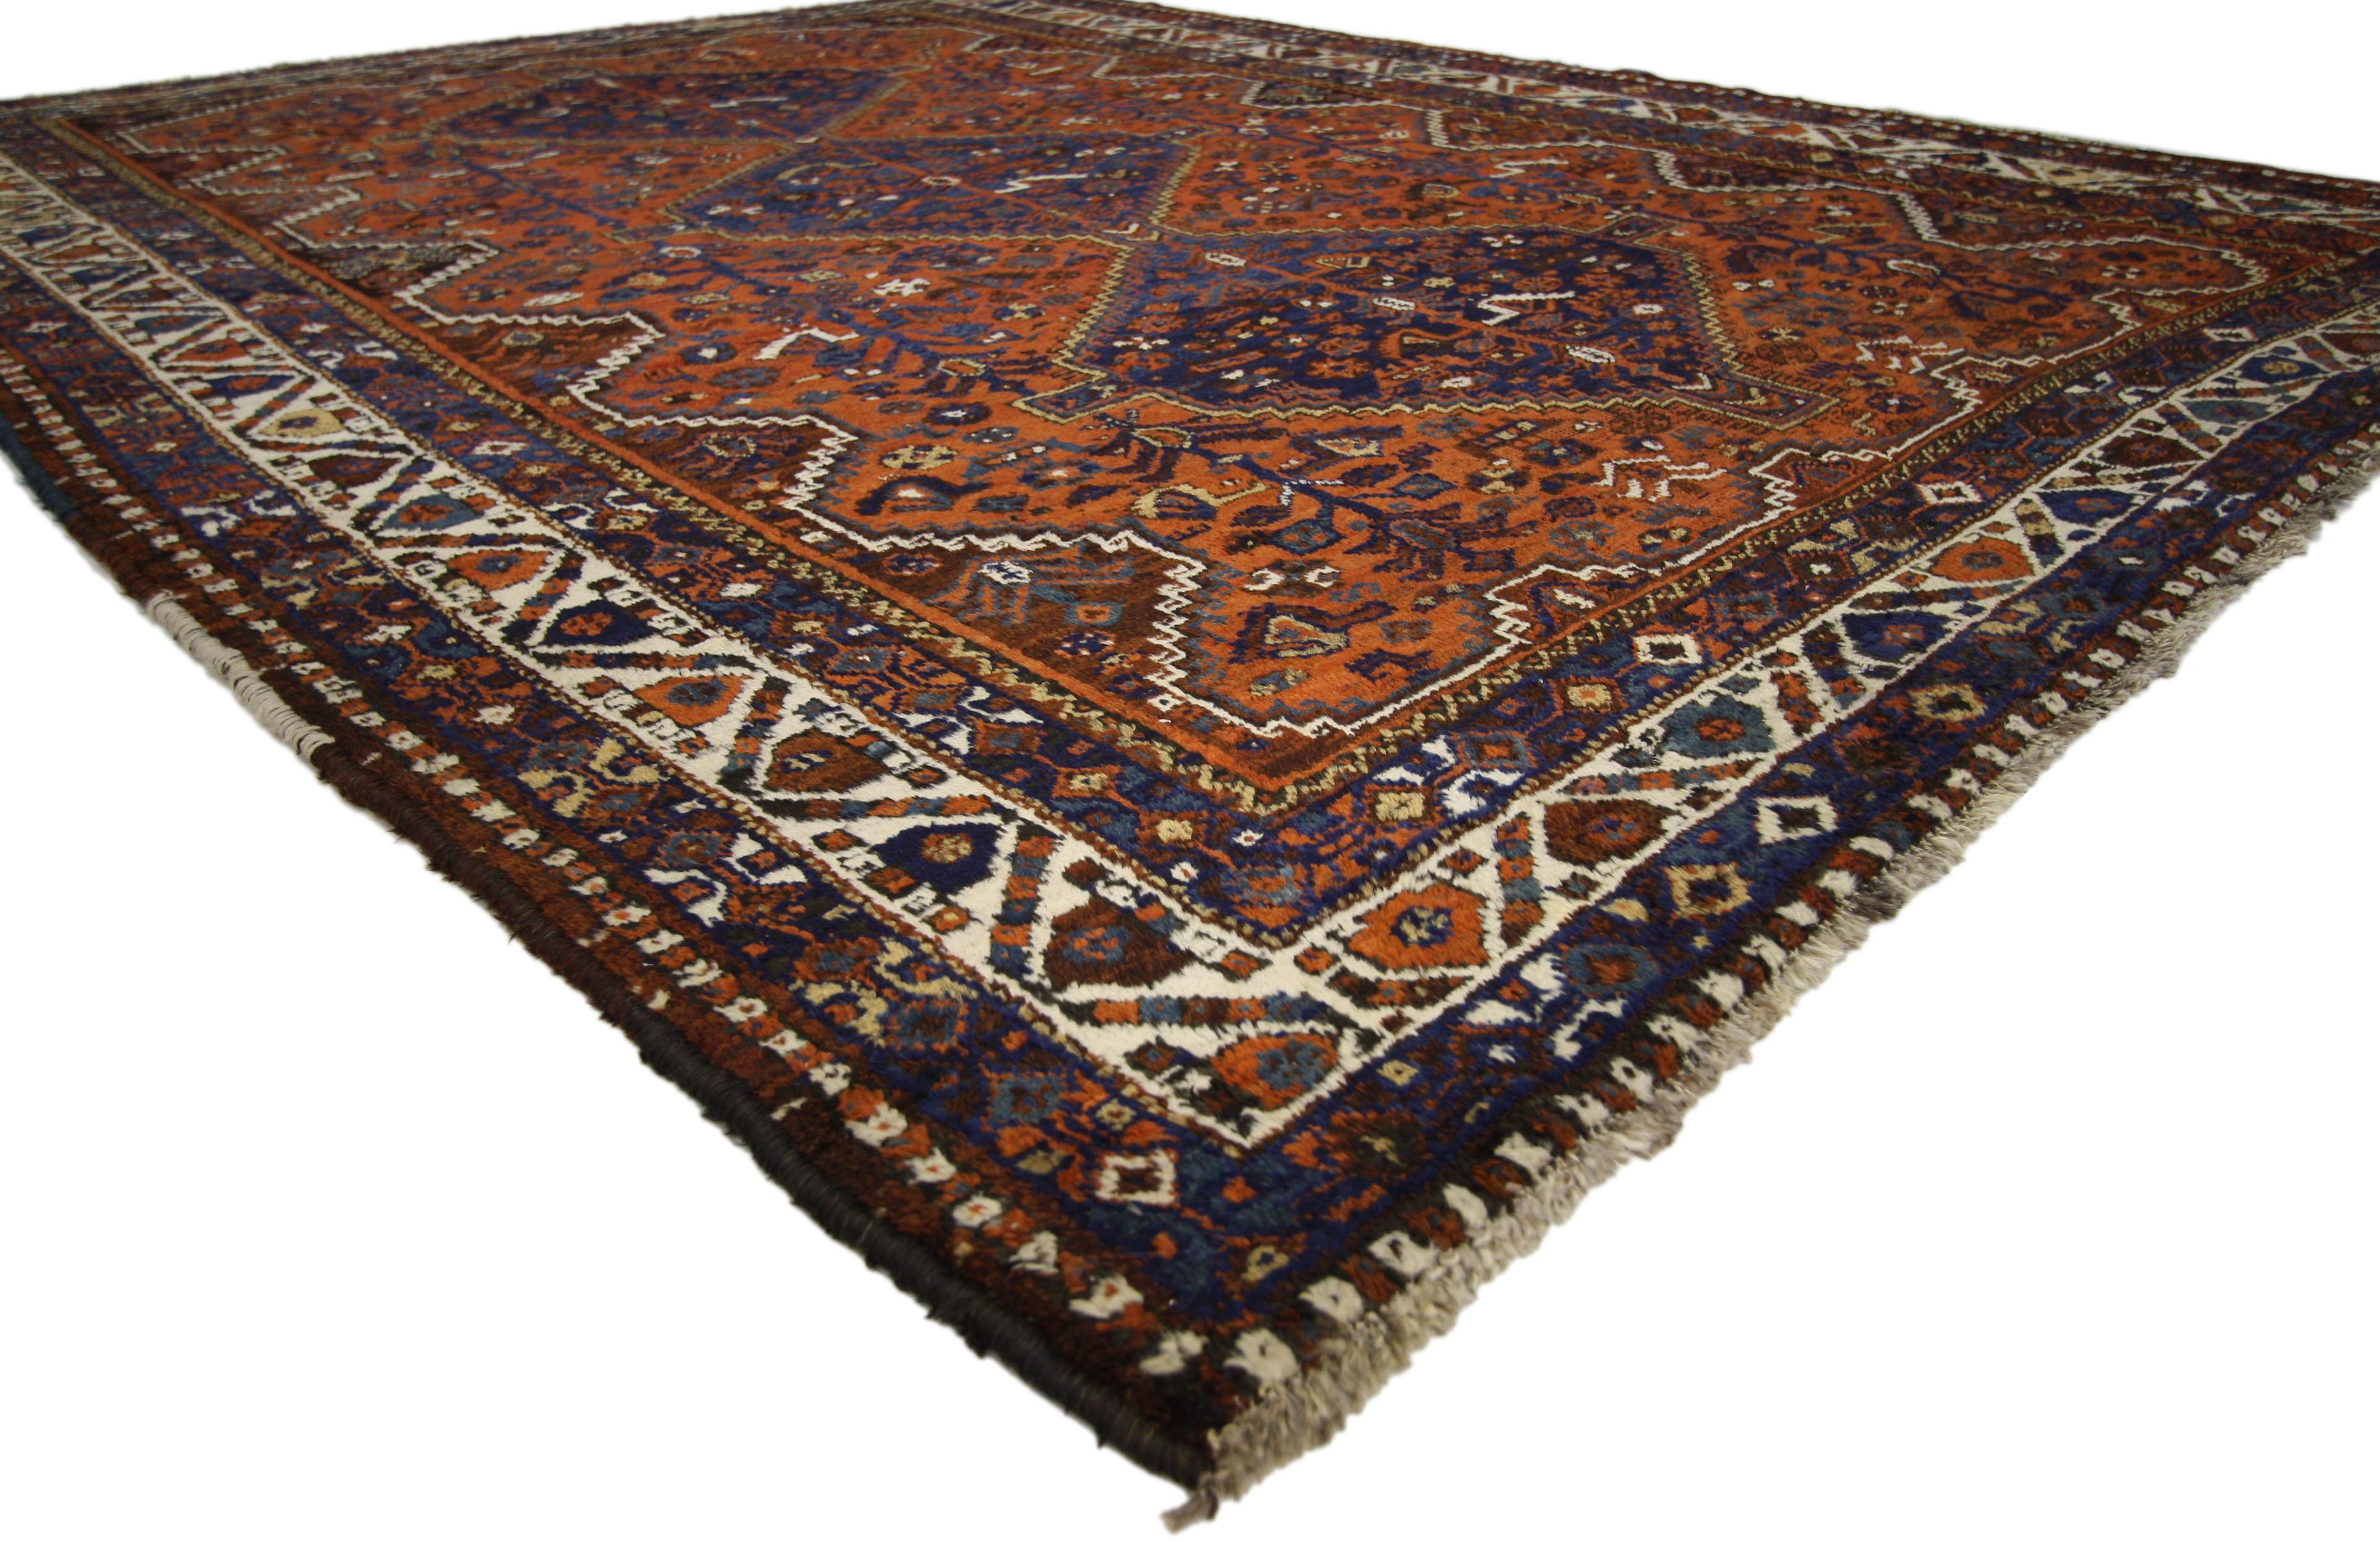 73624 Antique Shiraz Persian Rug with Mid-Century Modern Tribal Style. Displaying nomadic charm and nomadic tribal style, this hand-knotted wool antique Shiraz Persian rug is an amalgam of Caucasian Qashqai tribe influence. It features a navy blue 